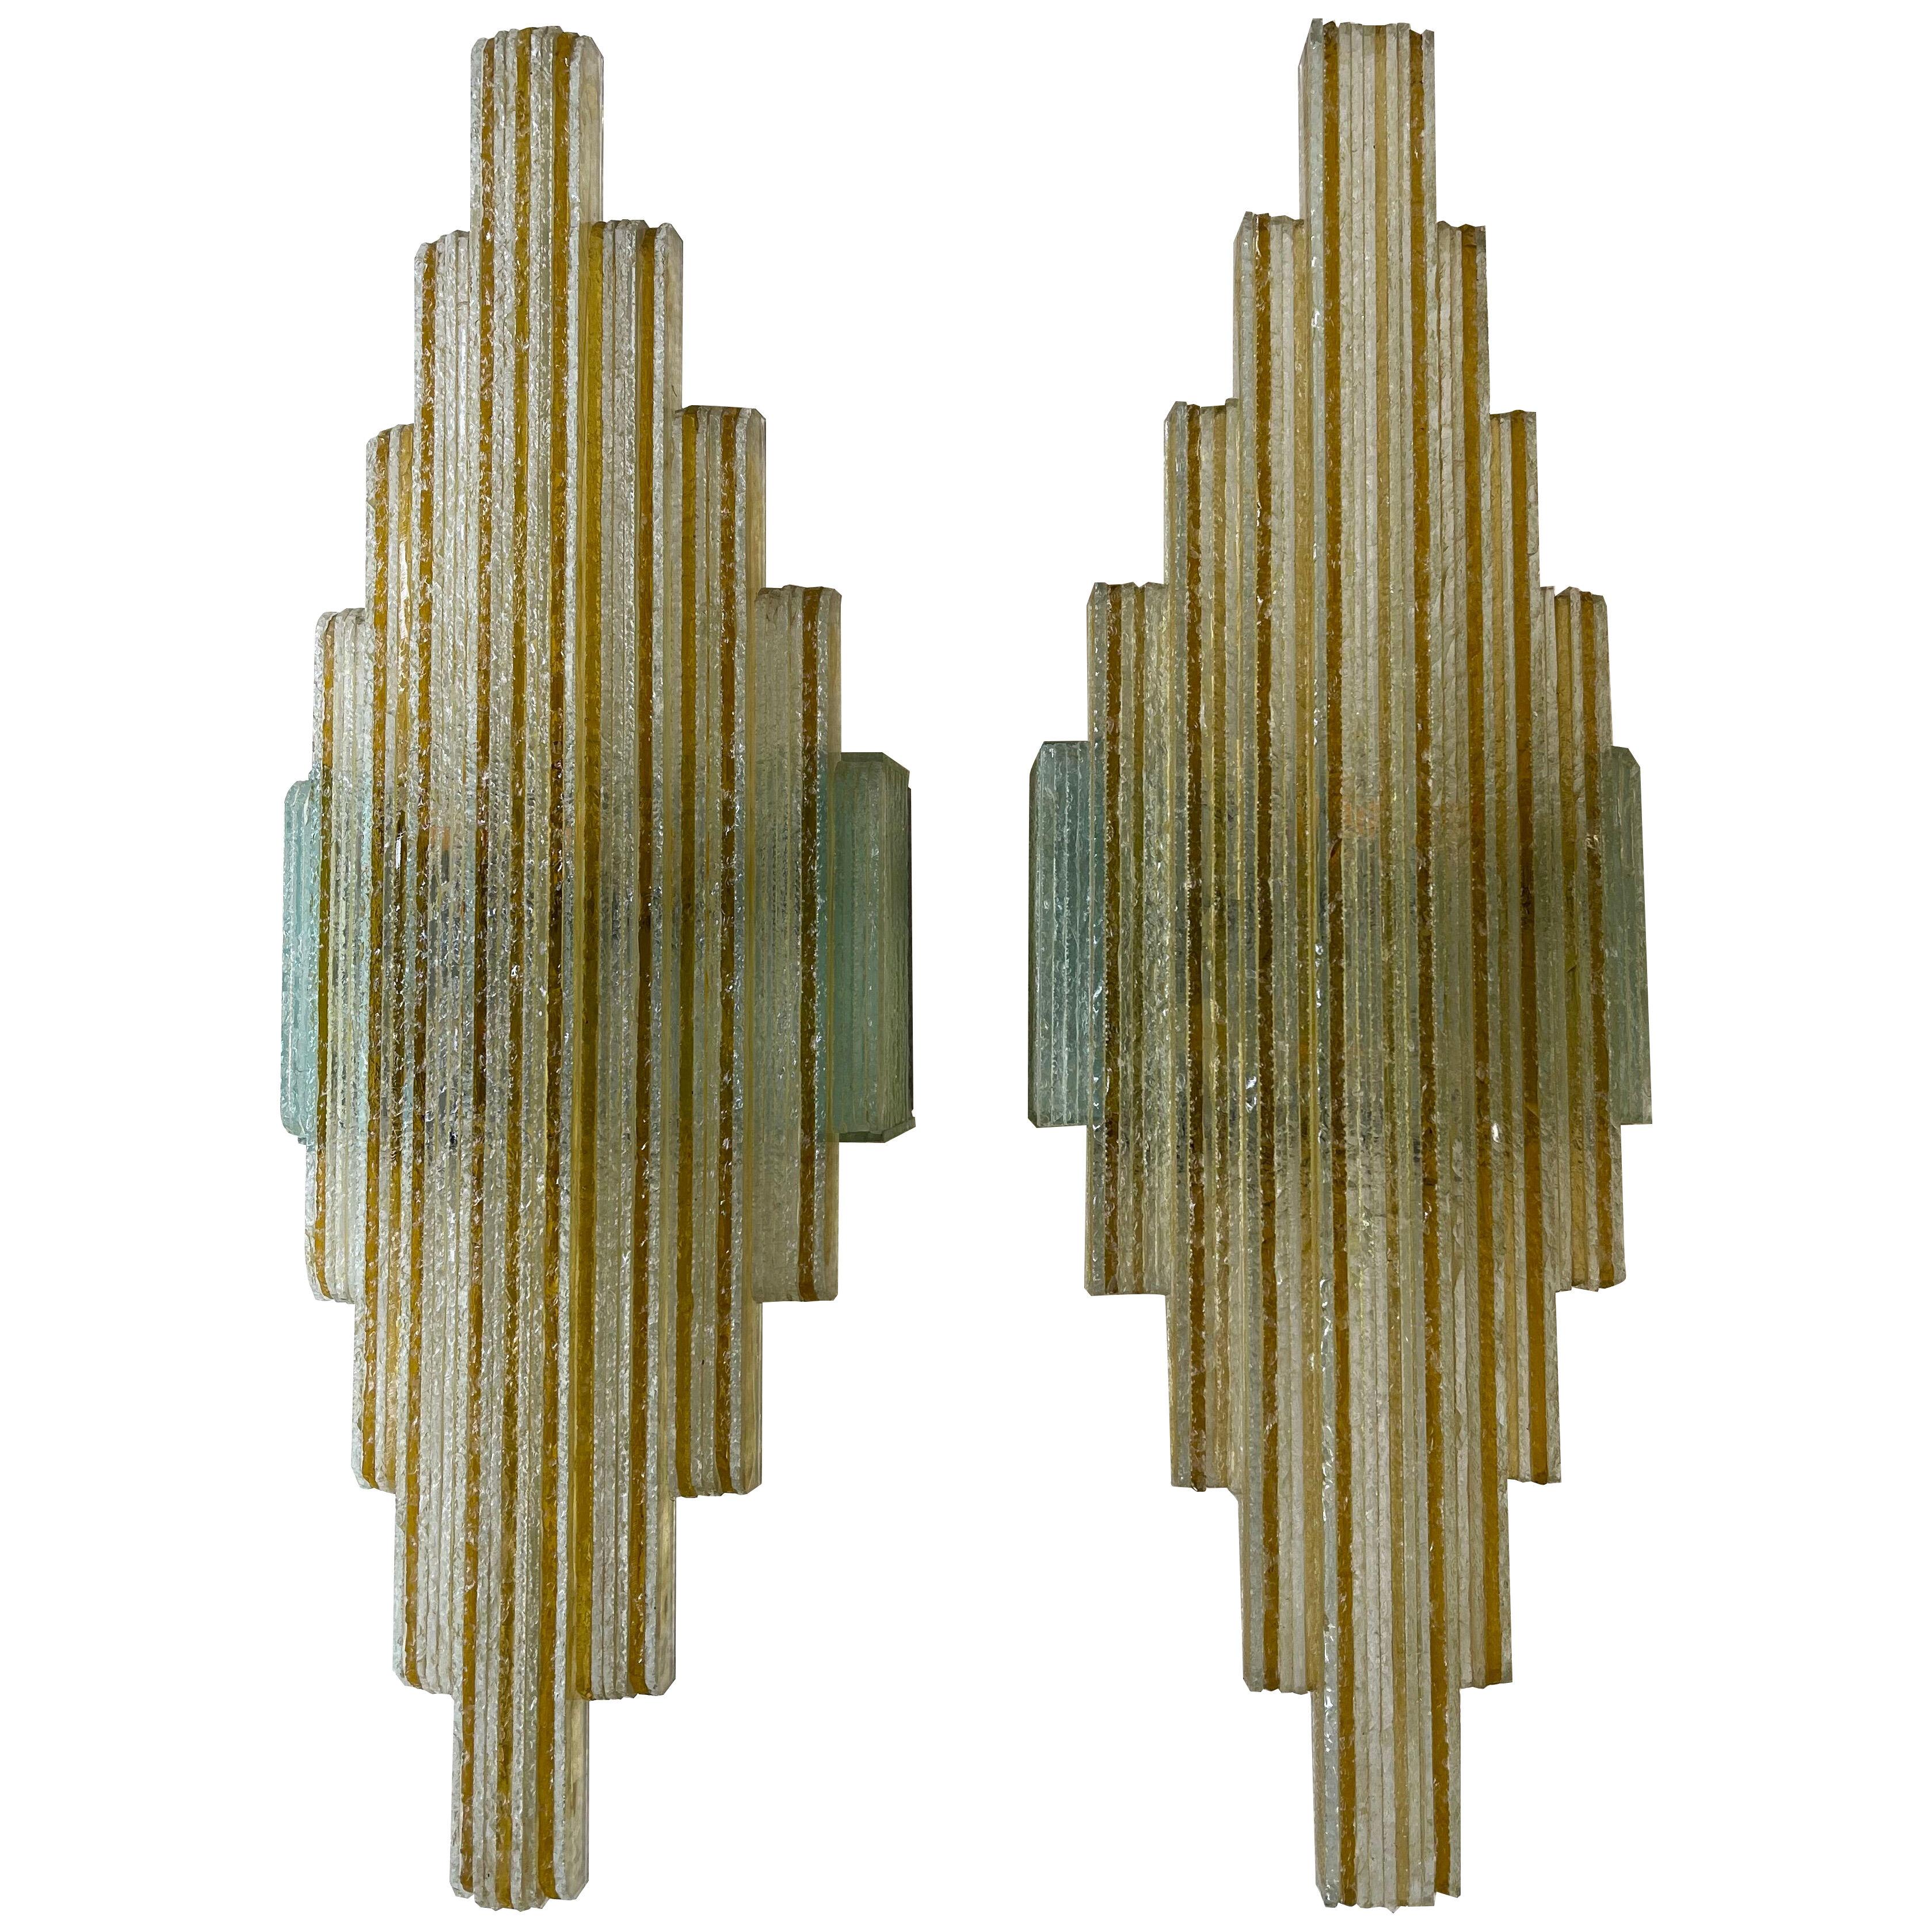 Pair of Hammered Yellow Glass Sconces by Poliarte, Italy, 1970s